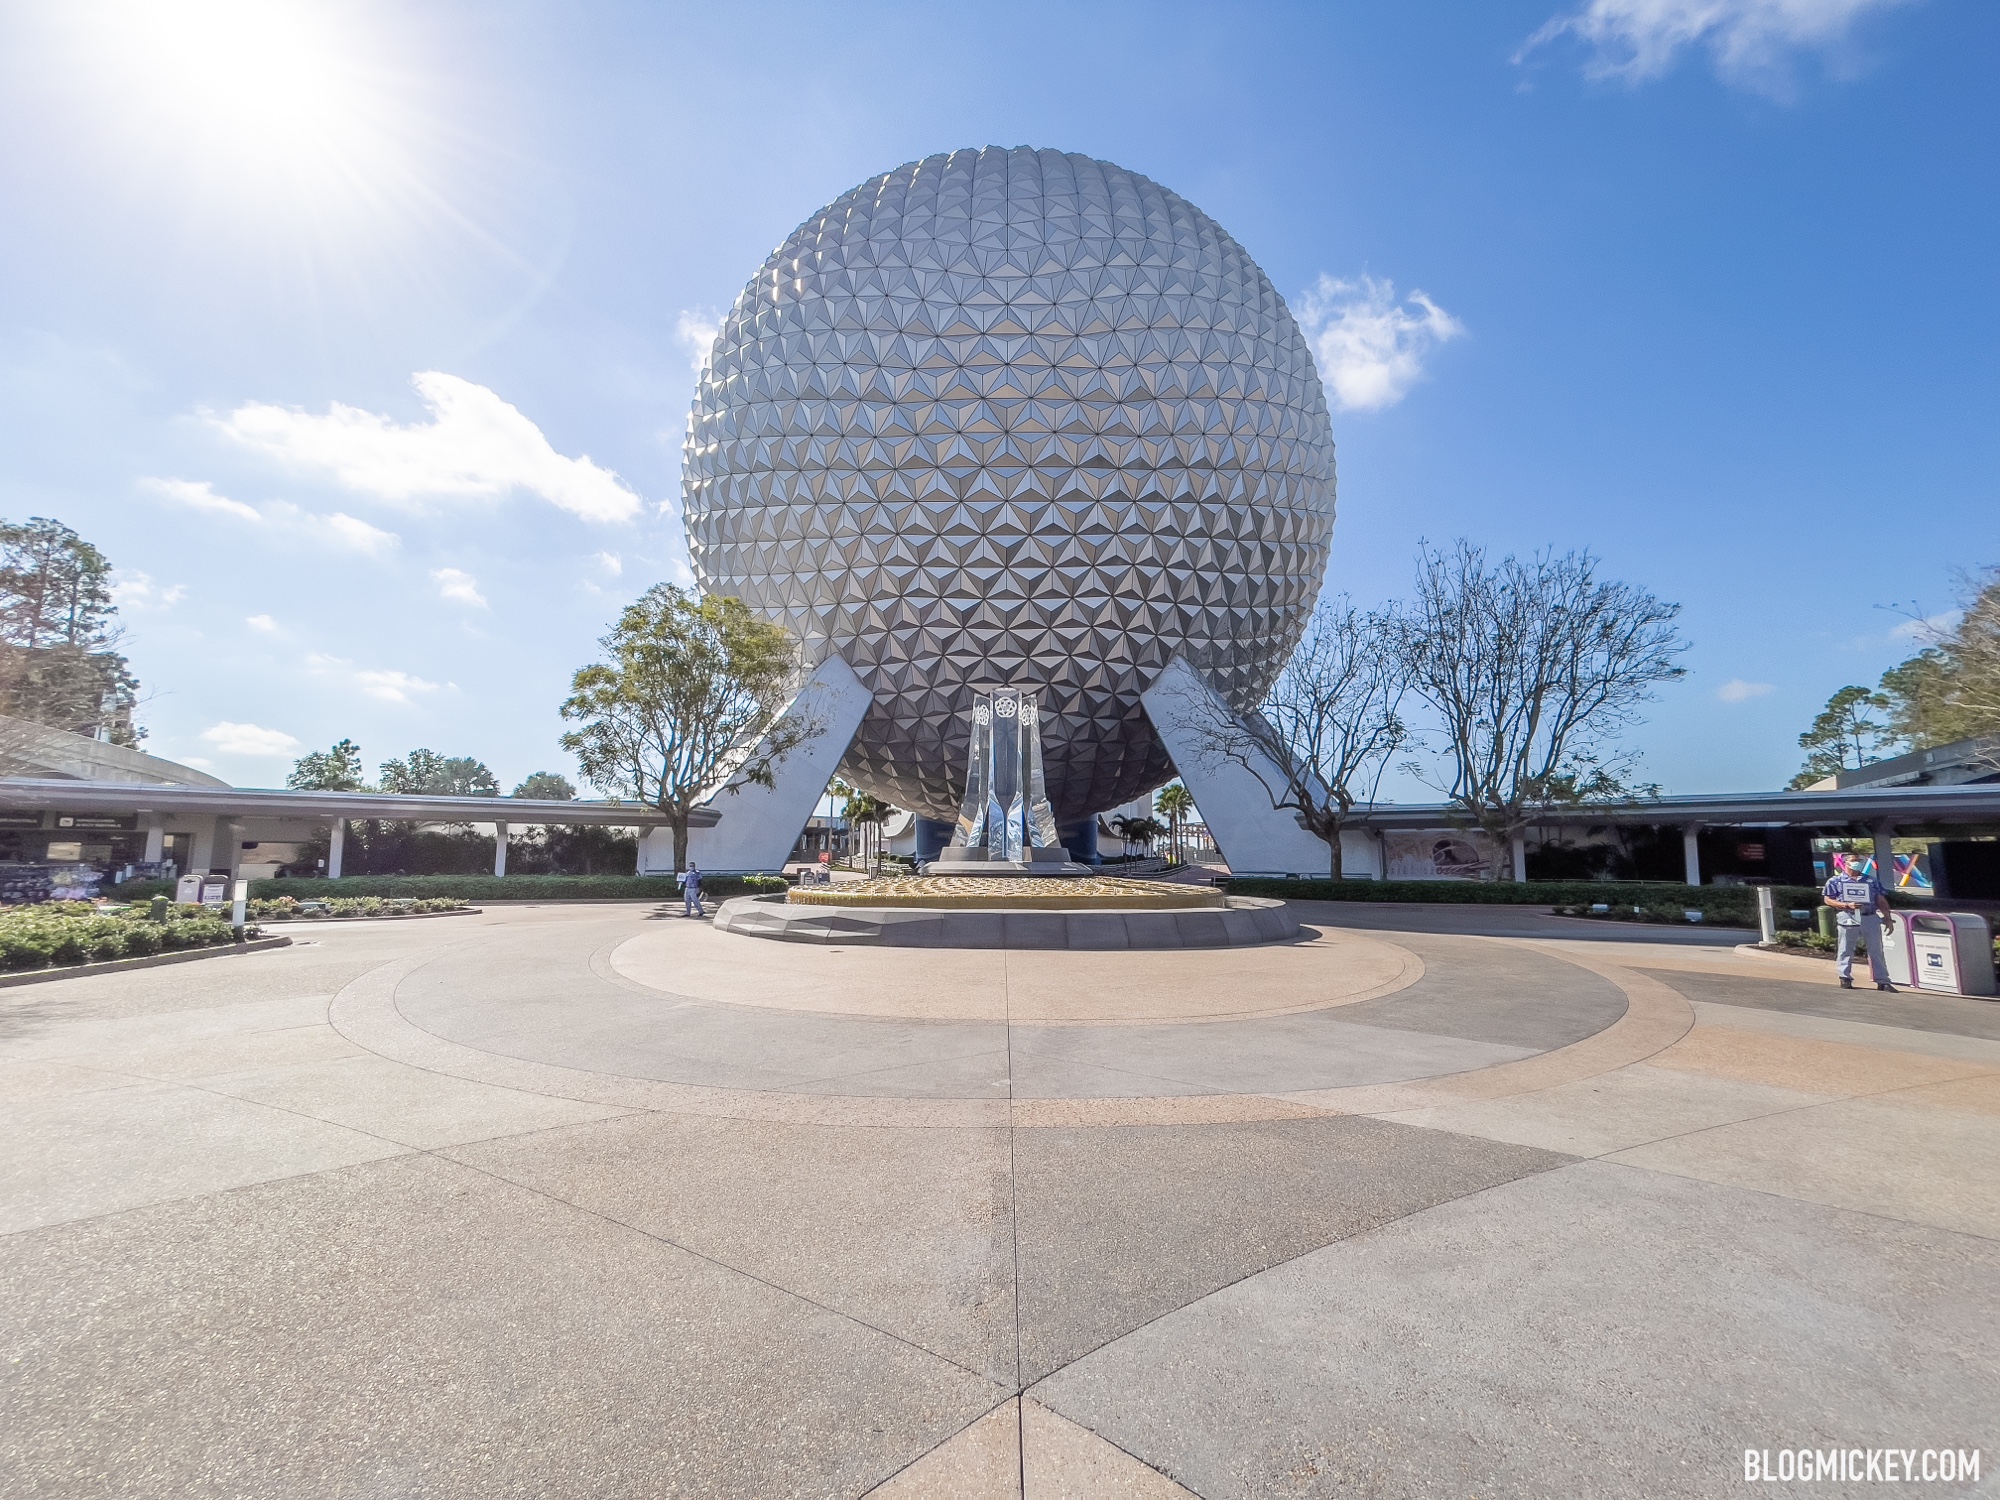 Final Construction Walls Removed From In Front of Spaceship Earth at EPCOT